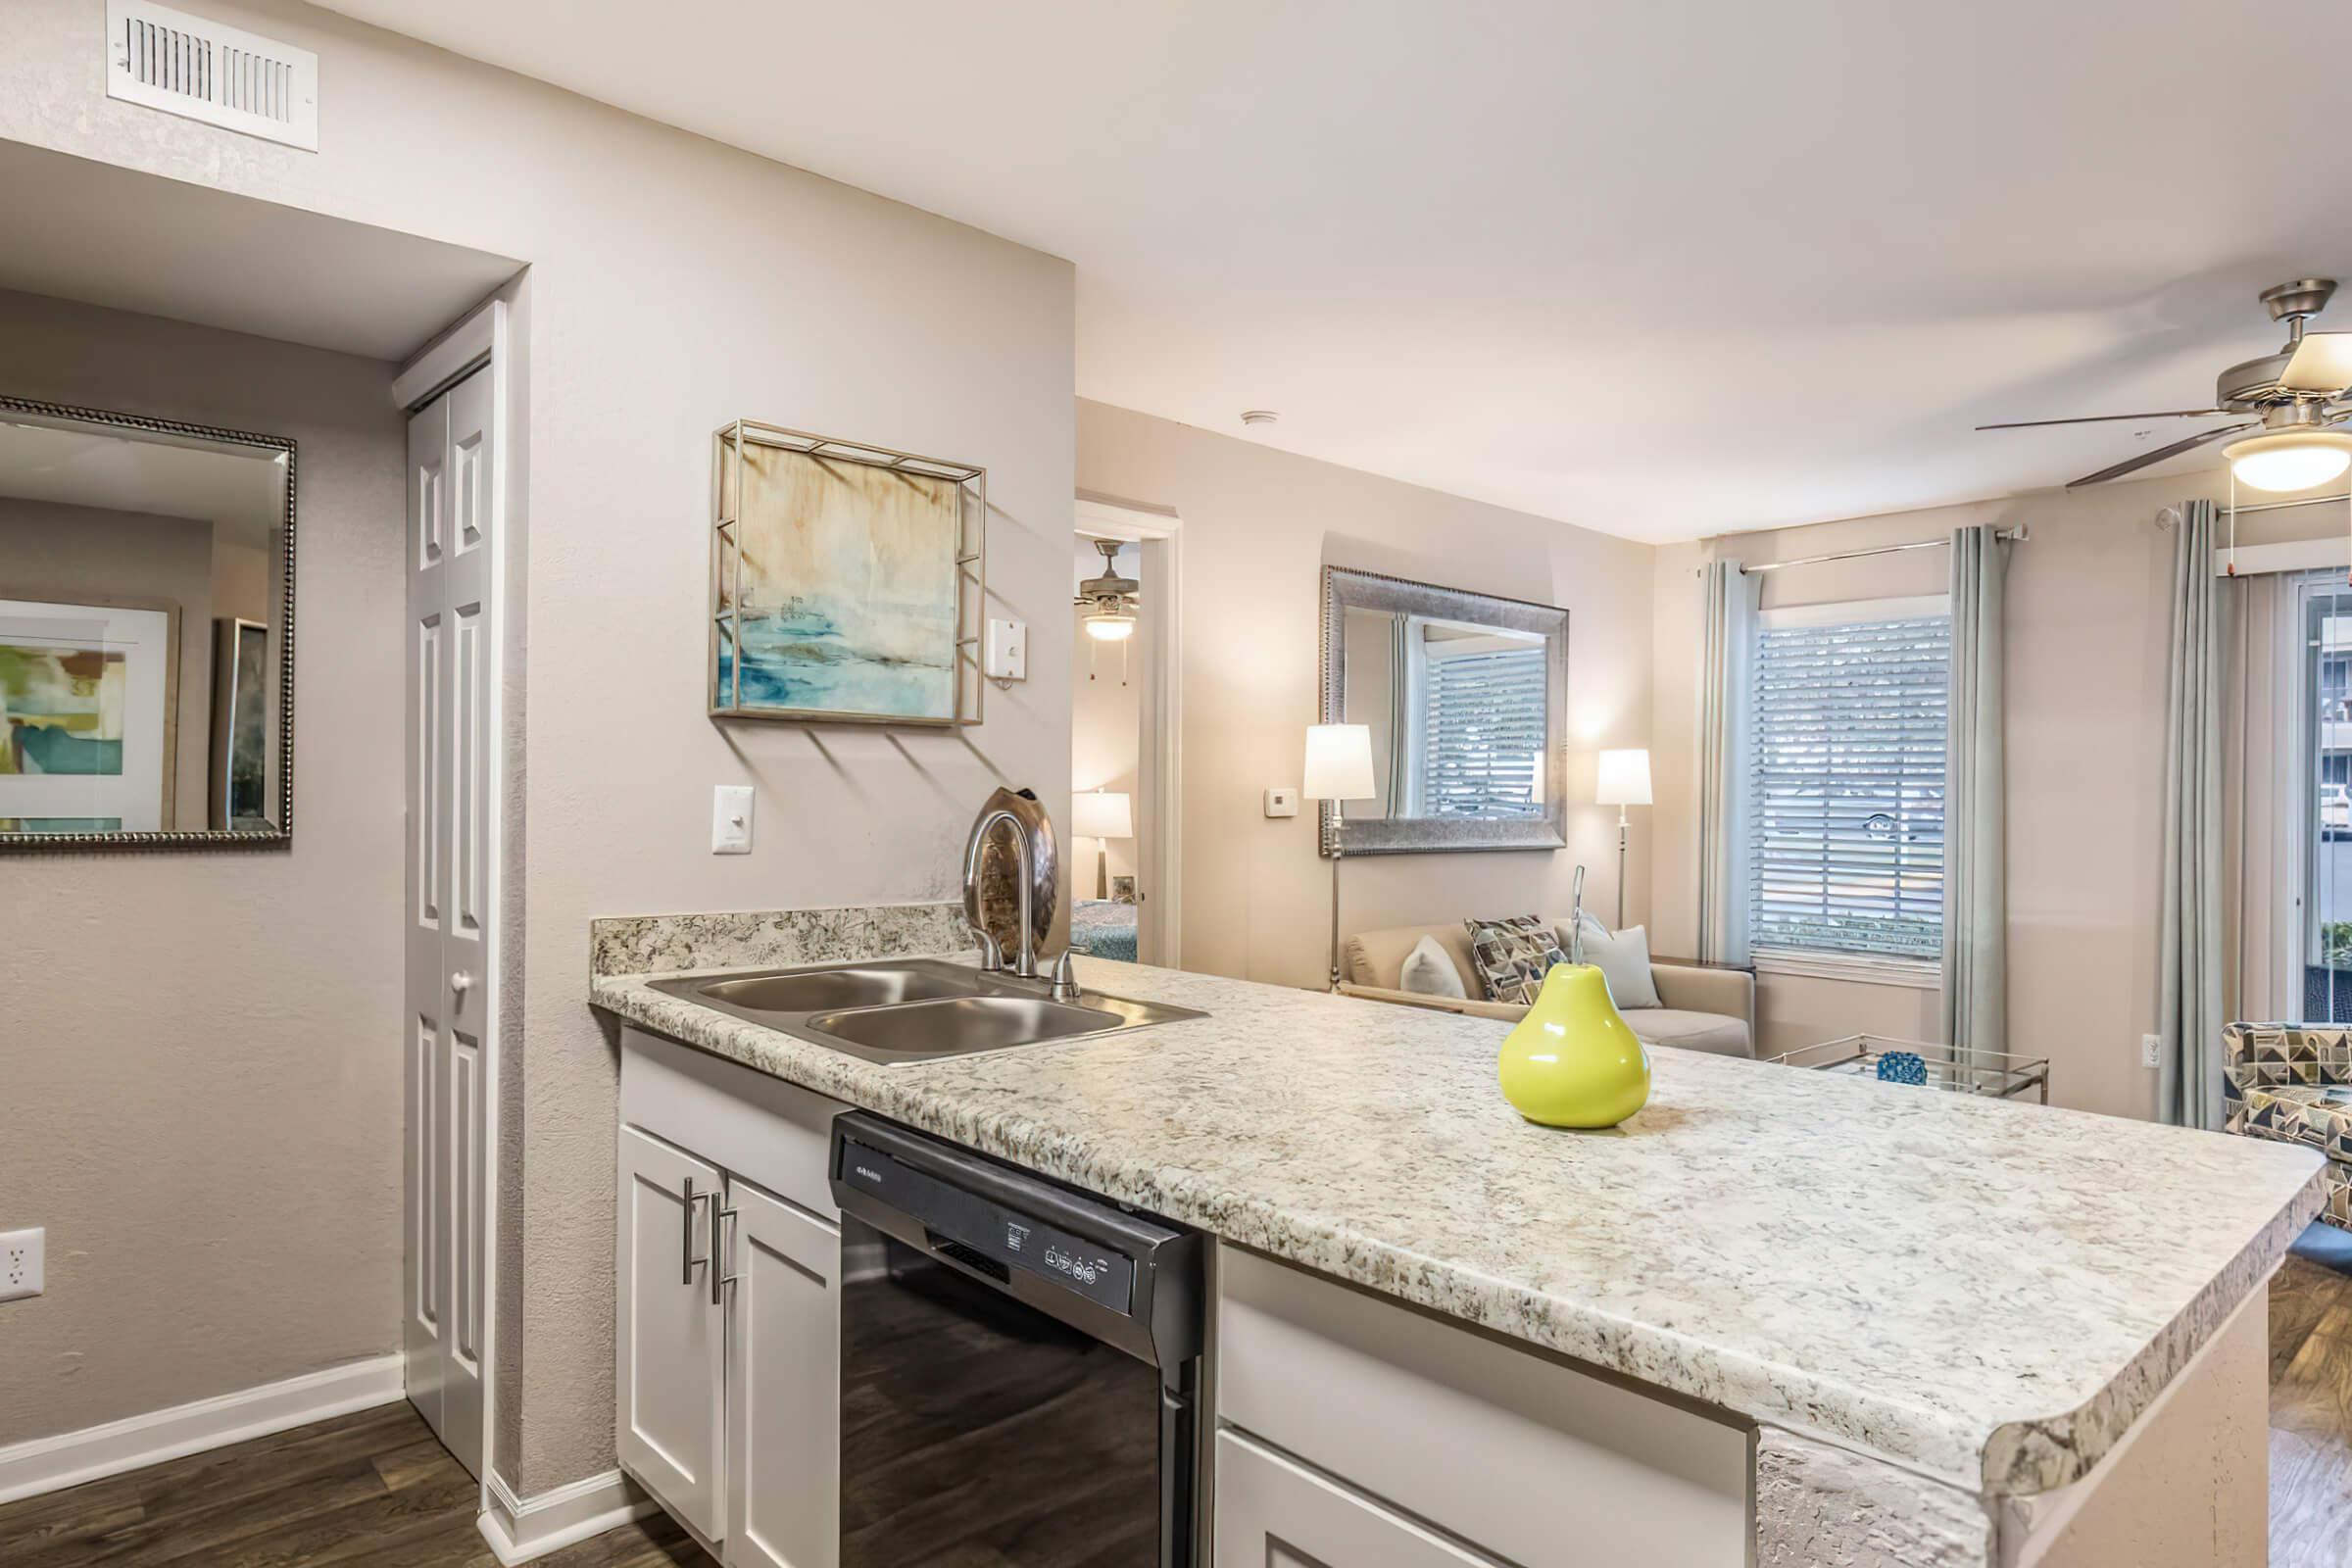 CHEF-READY KITCHEN WITH DISHWASHER, MICROWAVE, PANTRY, AND GRANITE-STYLE COUNTERTOPS